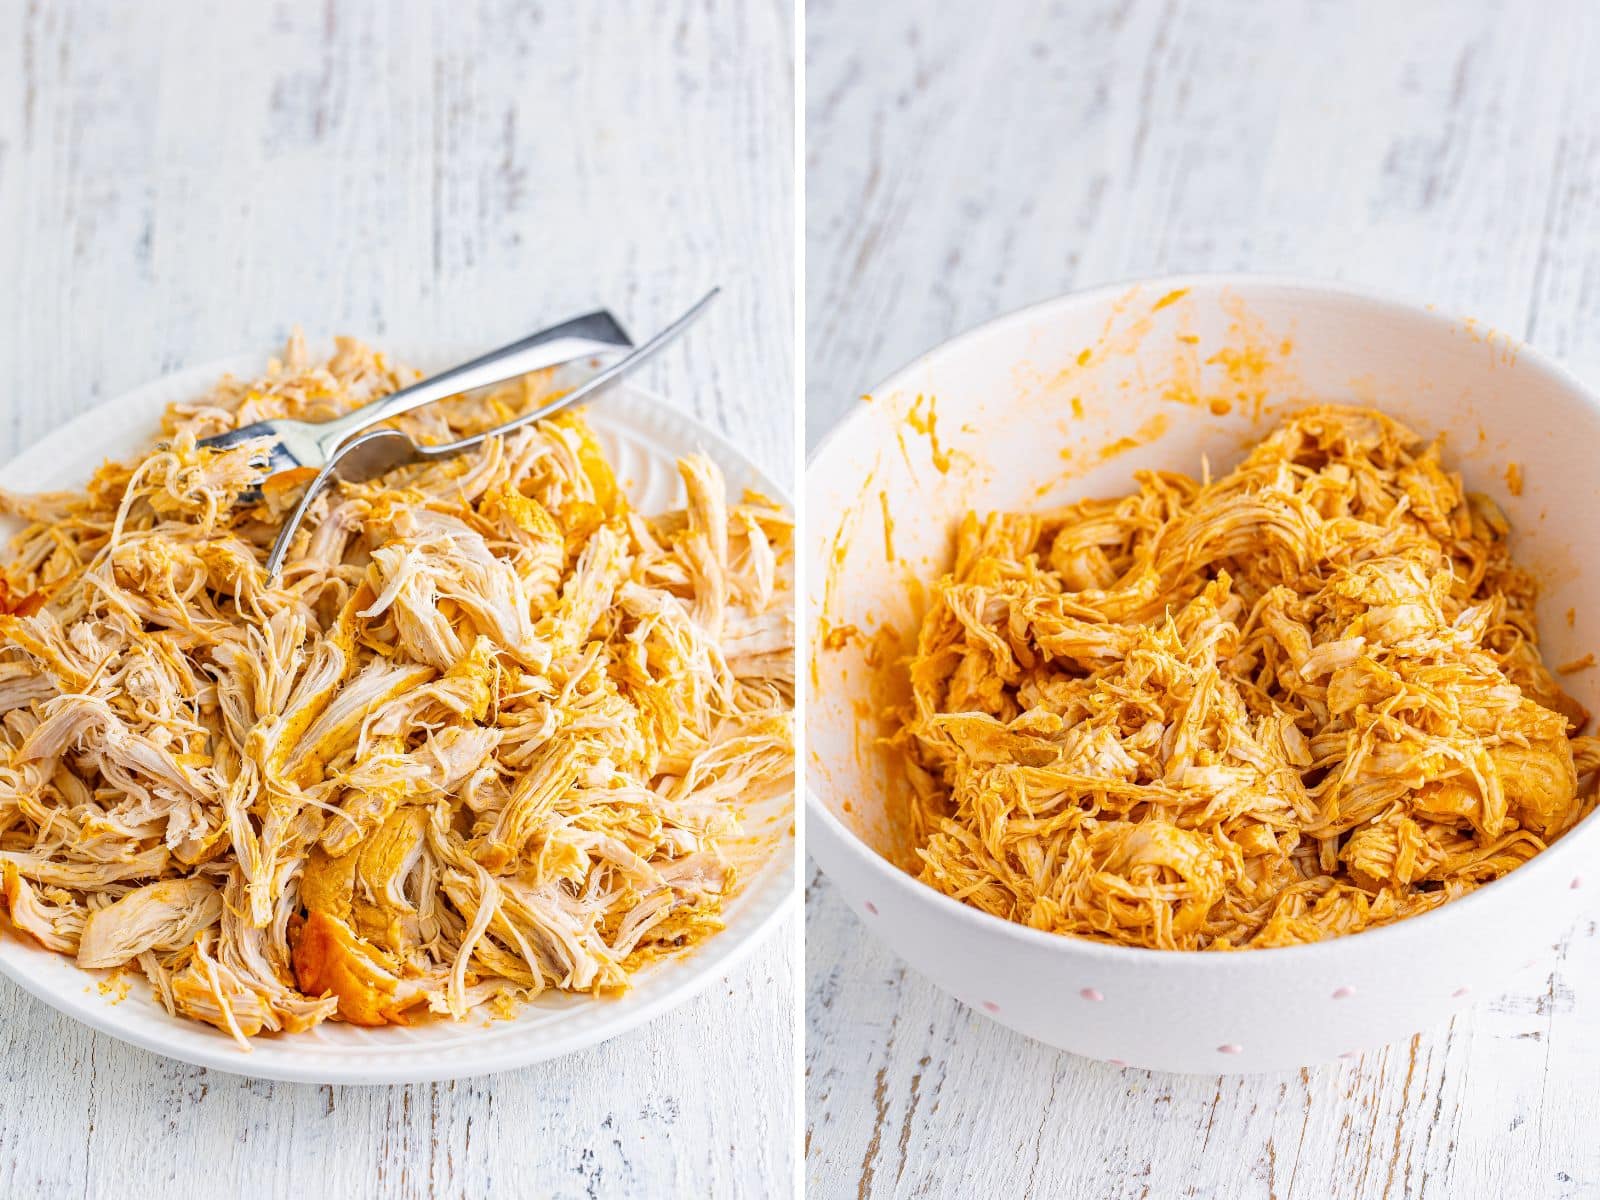 A plate of Buffalo shredded chicken and a bowl of shredded Buffalo Chicken with the cooking liquid.